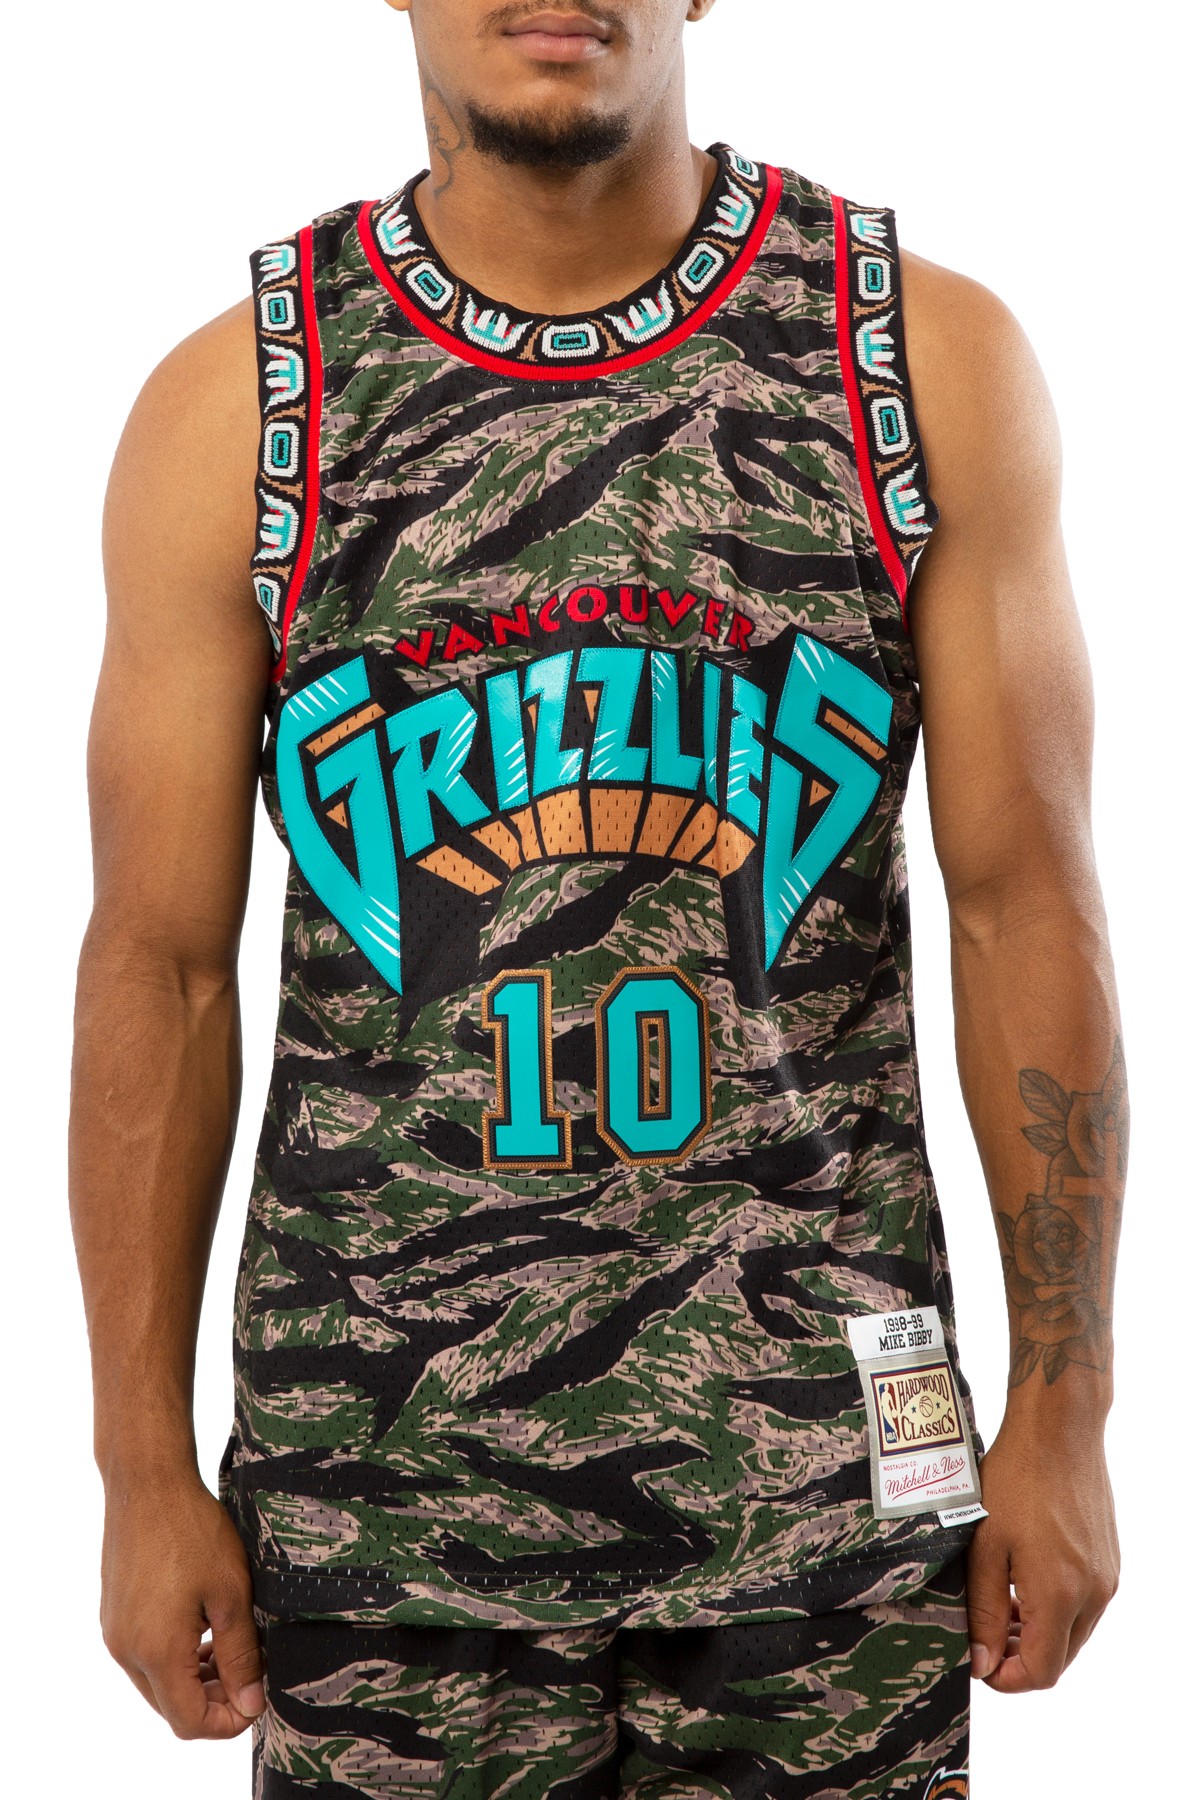 Mitchell & Ness Team Marble Swingman Mike Bibby Vancouver Grizzlies 1998-99 Jersey